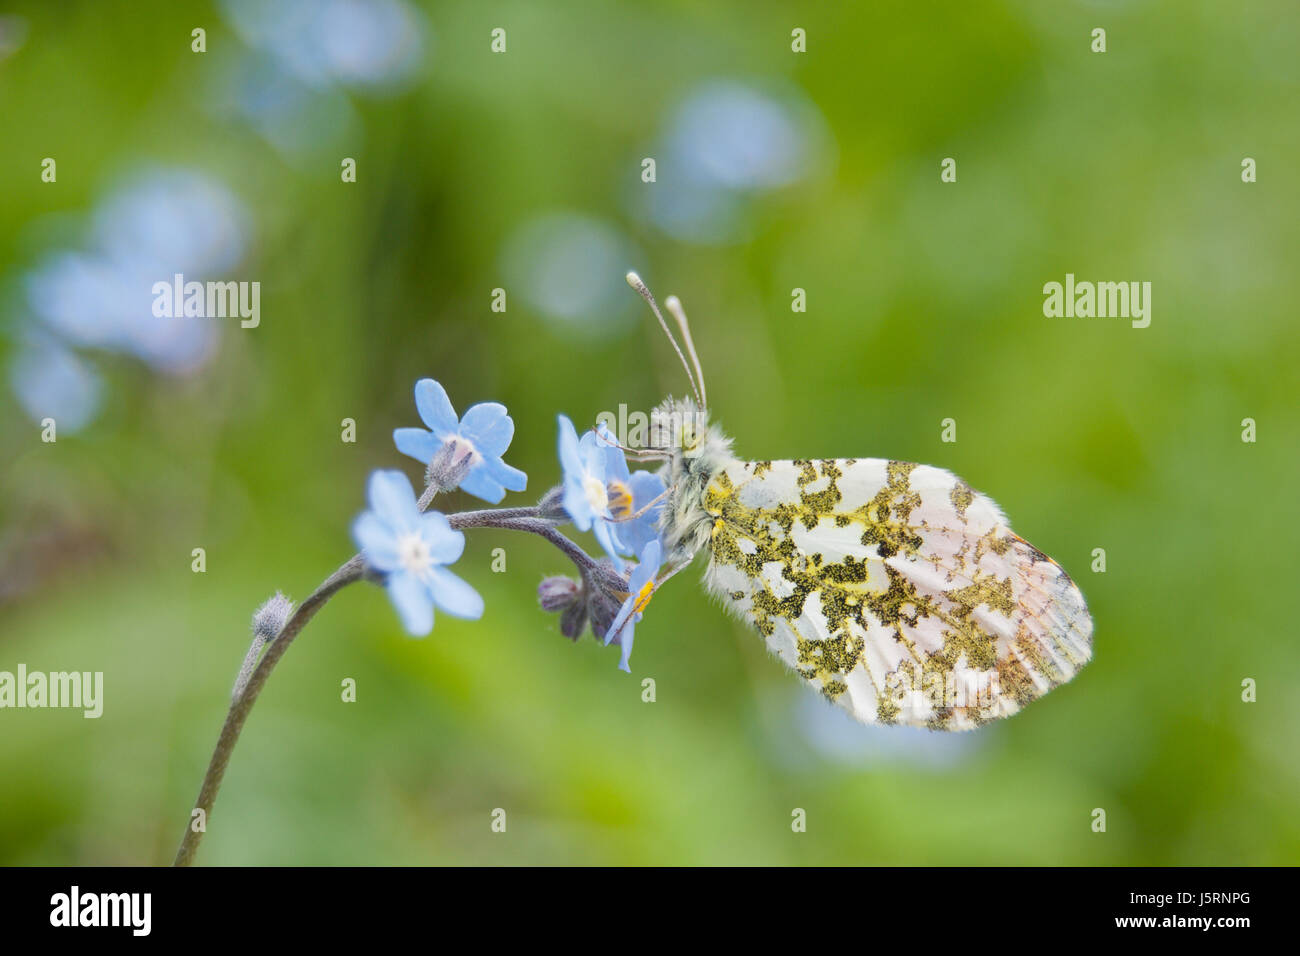 Male orange tip butterfly (Anthocharis cardamines) on wood forget-me-not (Myosotis sylvatica) Stock Photo